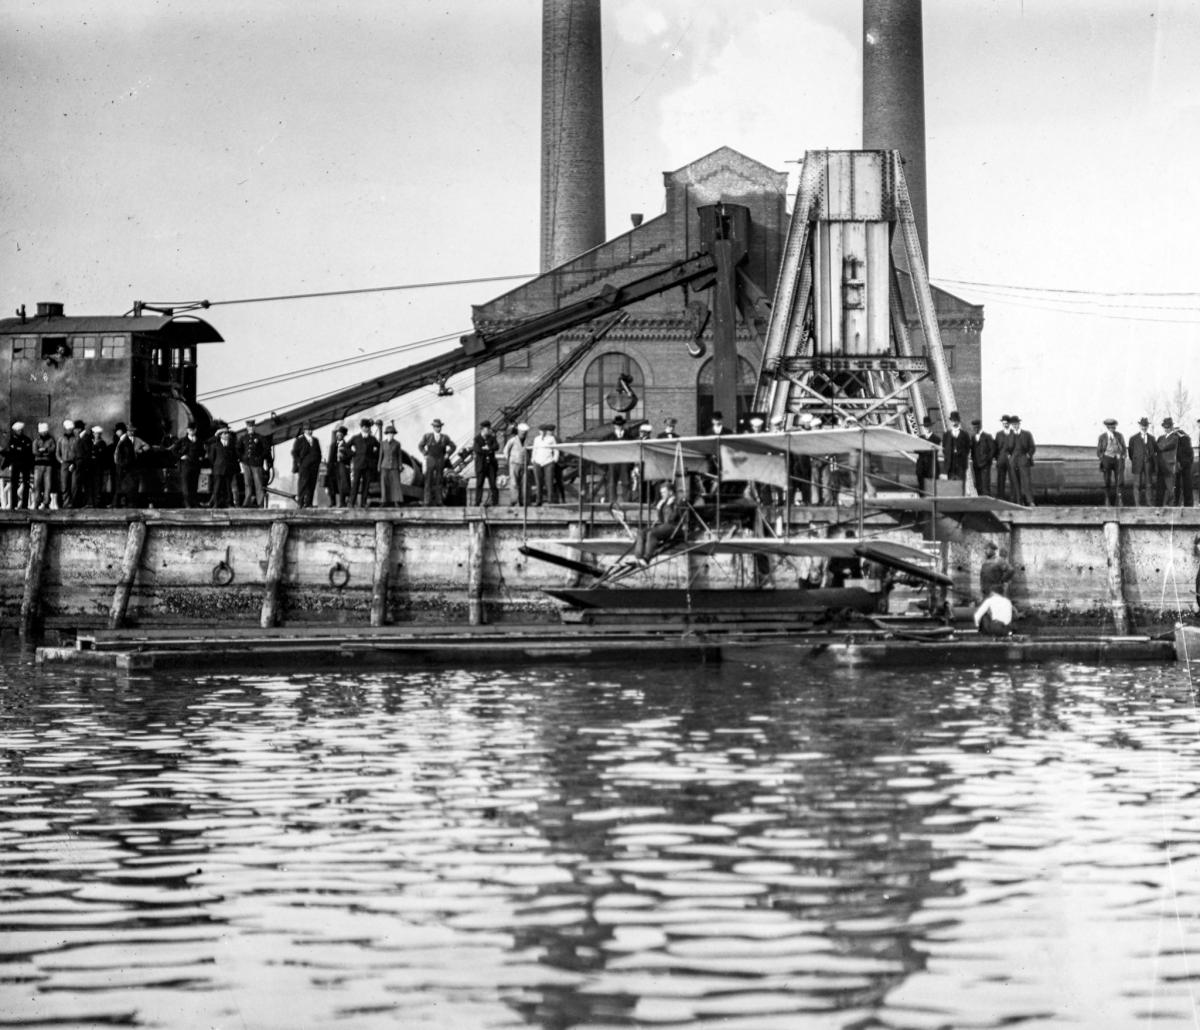 LT Theodore Ellyson testing the W.I. Chamber's catapulting device at the Washington Navy Yard, November 12, 1912